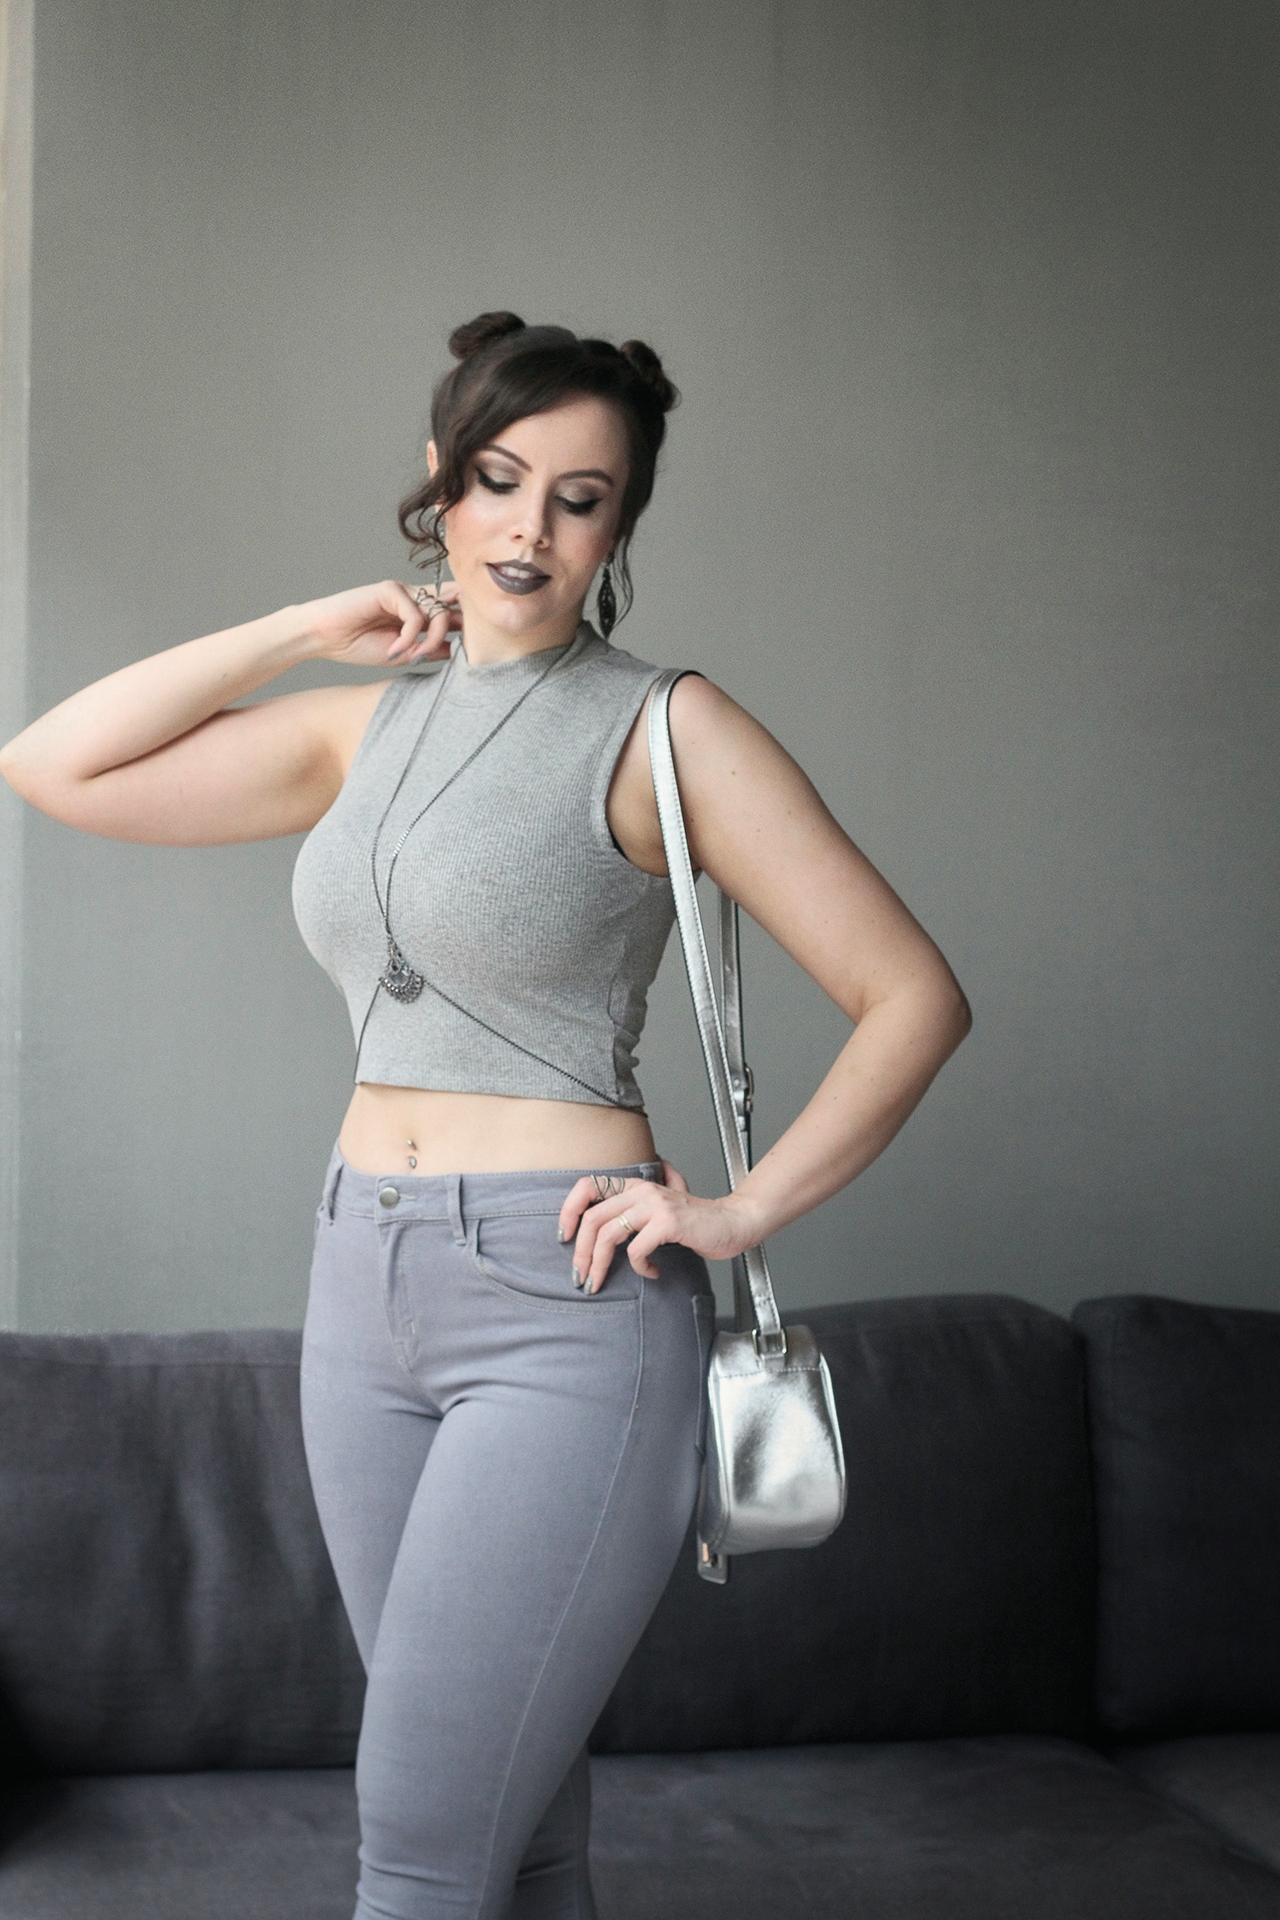 gostei-e-agora-look-total-cinza-groufit-all-gray-bodychain-0010